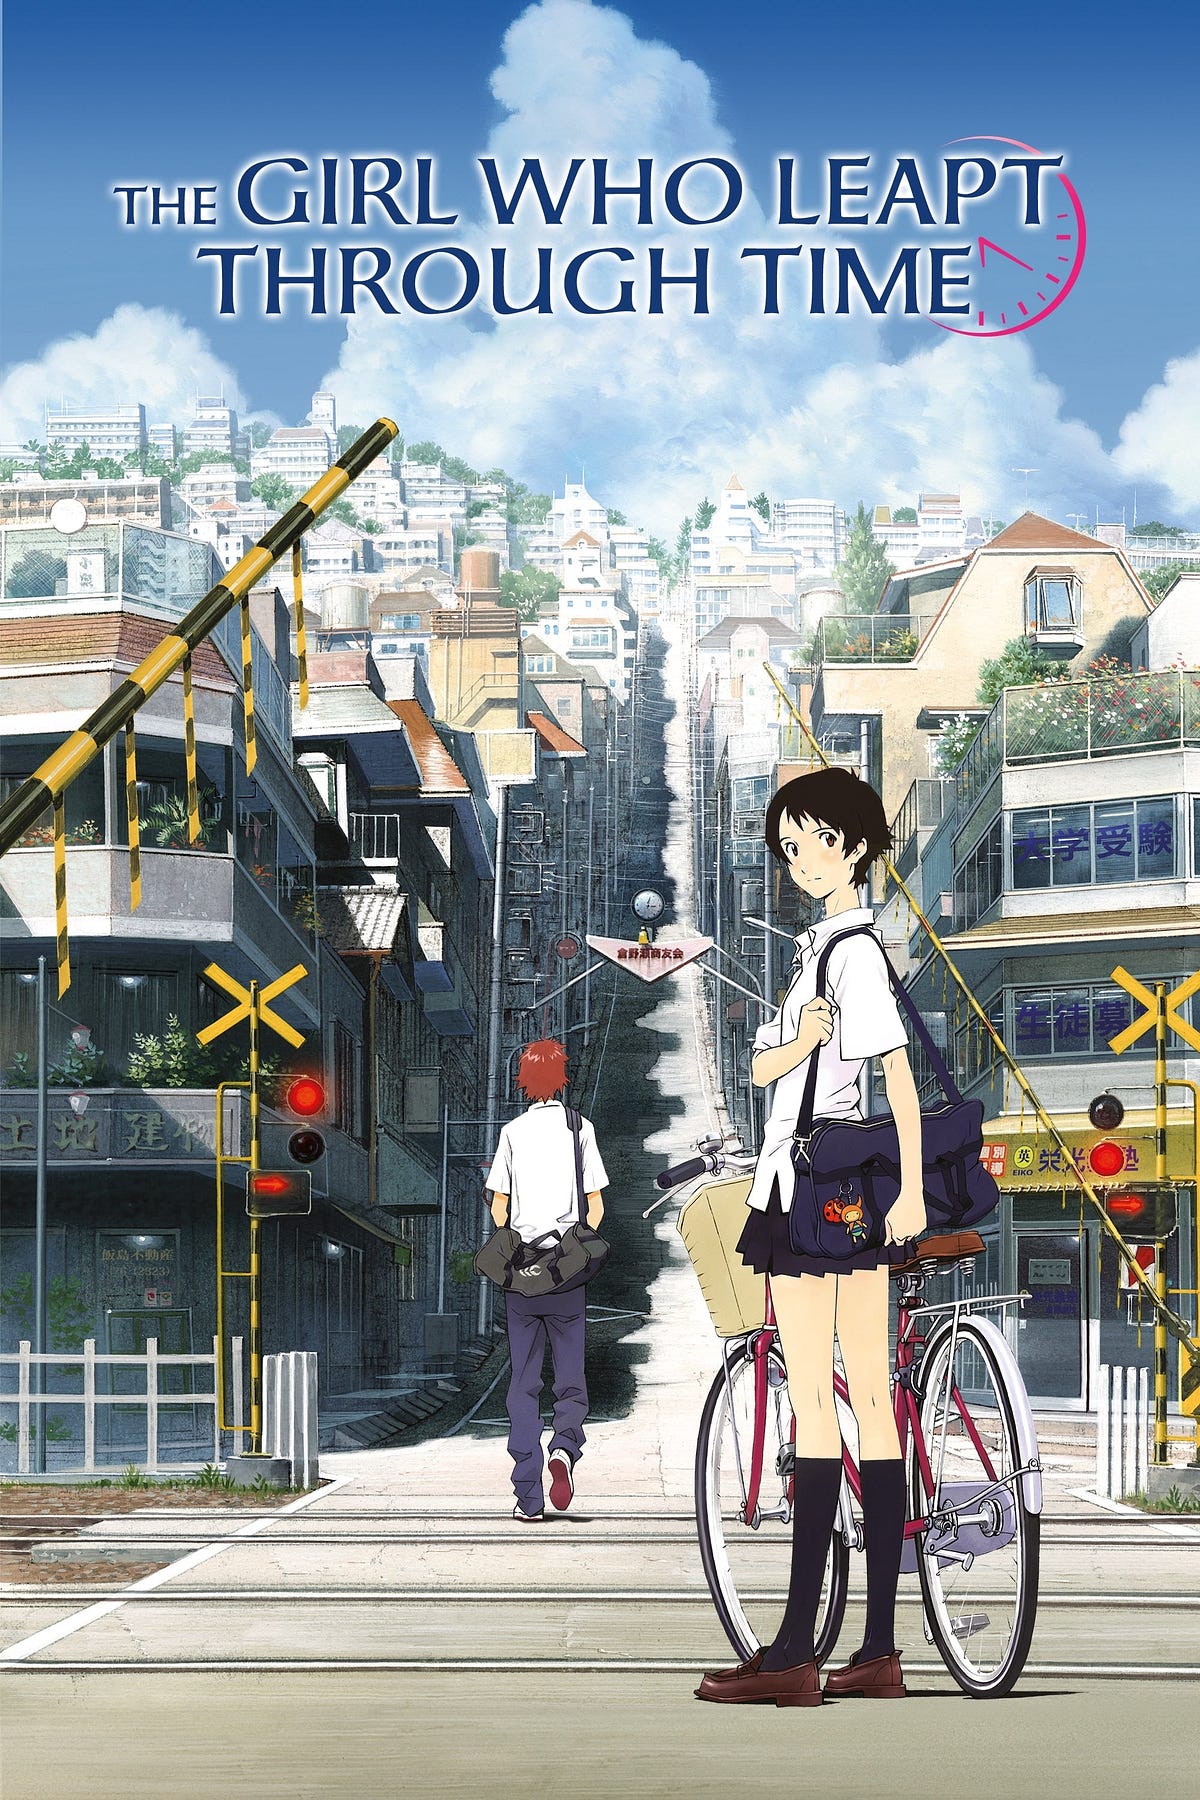 Thoughts On The Girl Who Leapt Through Time | Anime Thoughts